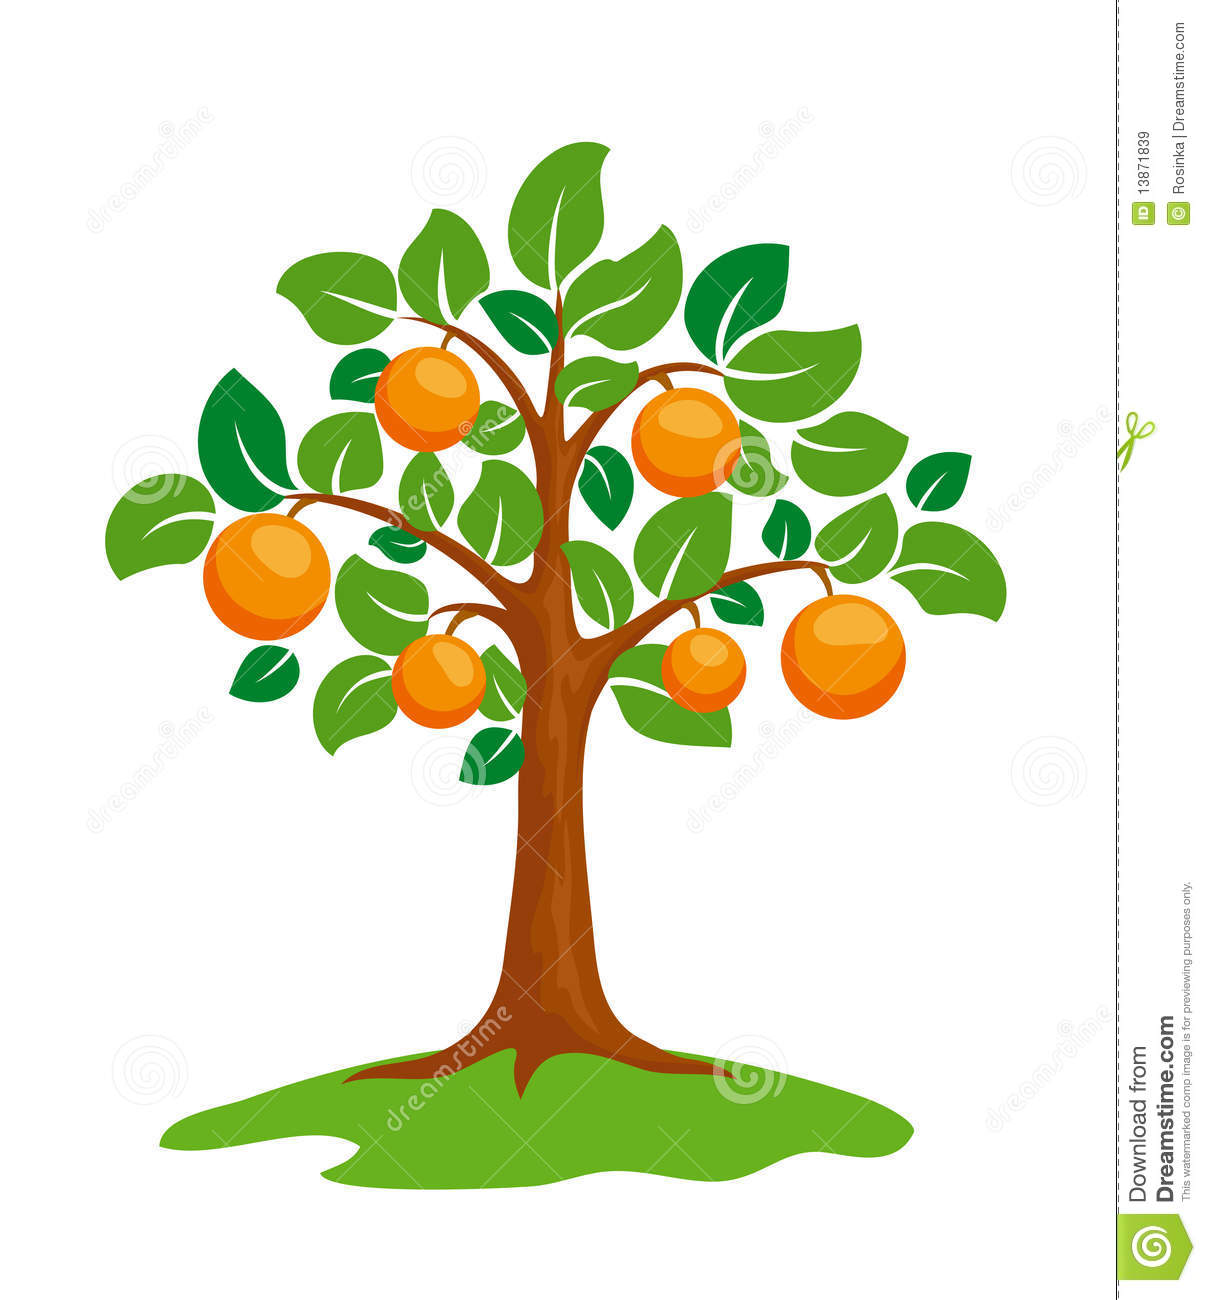 There Is 35 Peach Tree Farm   Free Cliparts All Used For Free